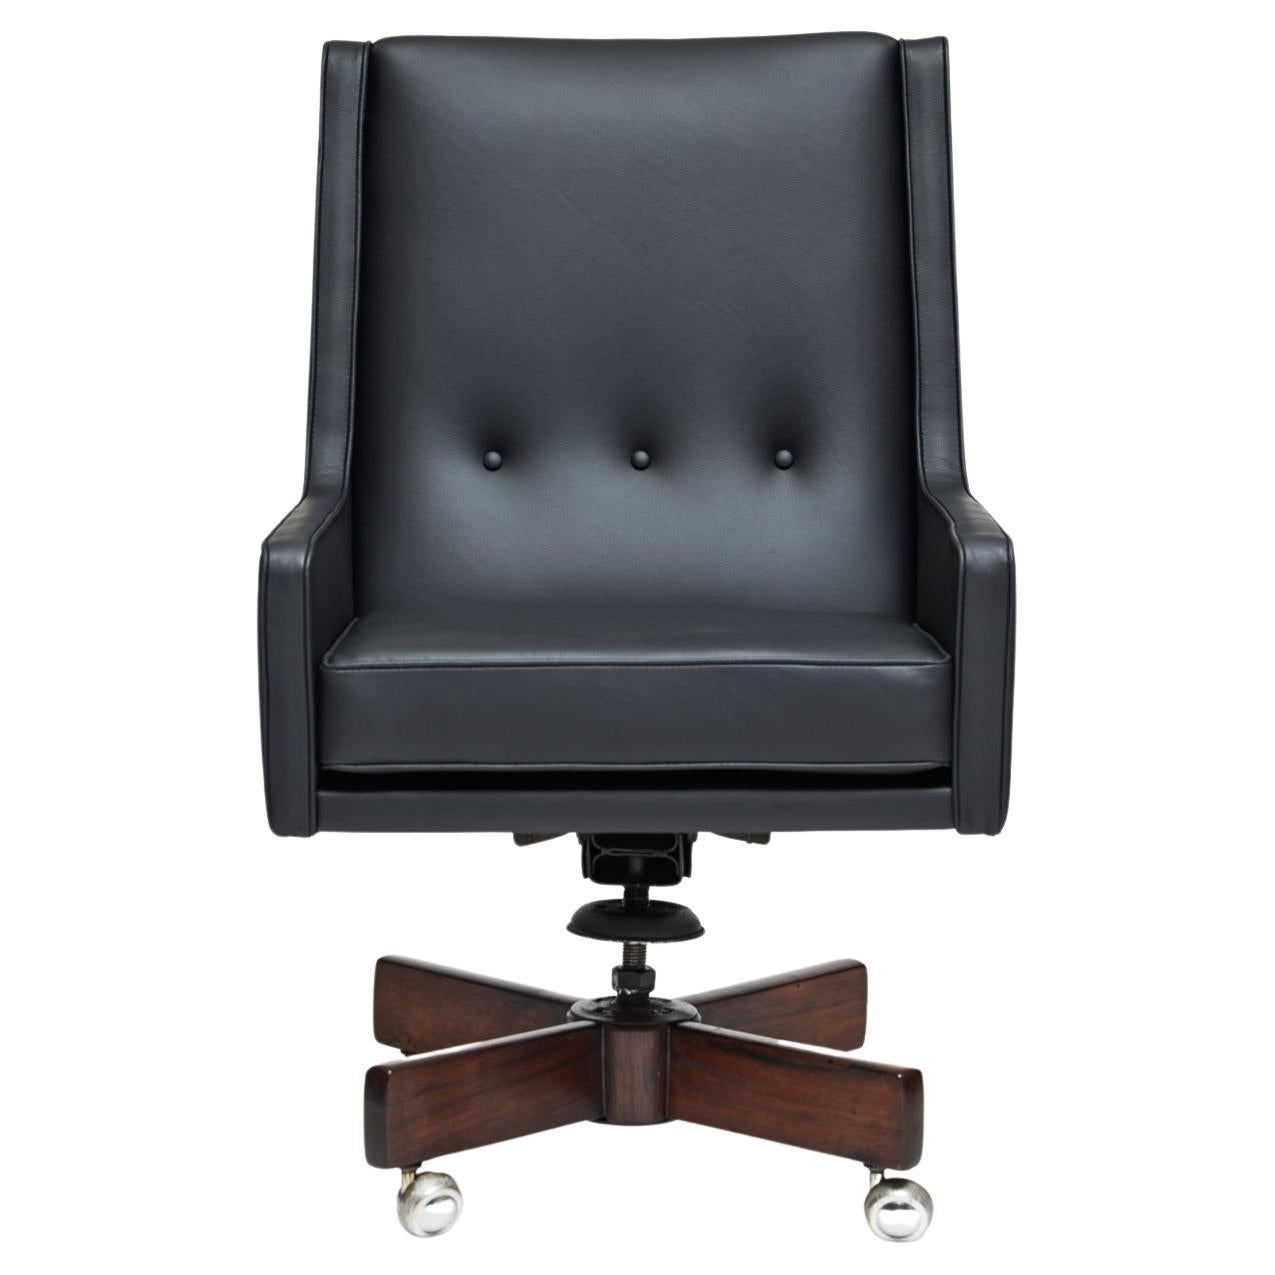 South American Mid-Century Modern Swivel Armchair in Black Leather by Sergio Rodrigues, Brazil